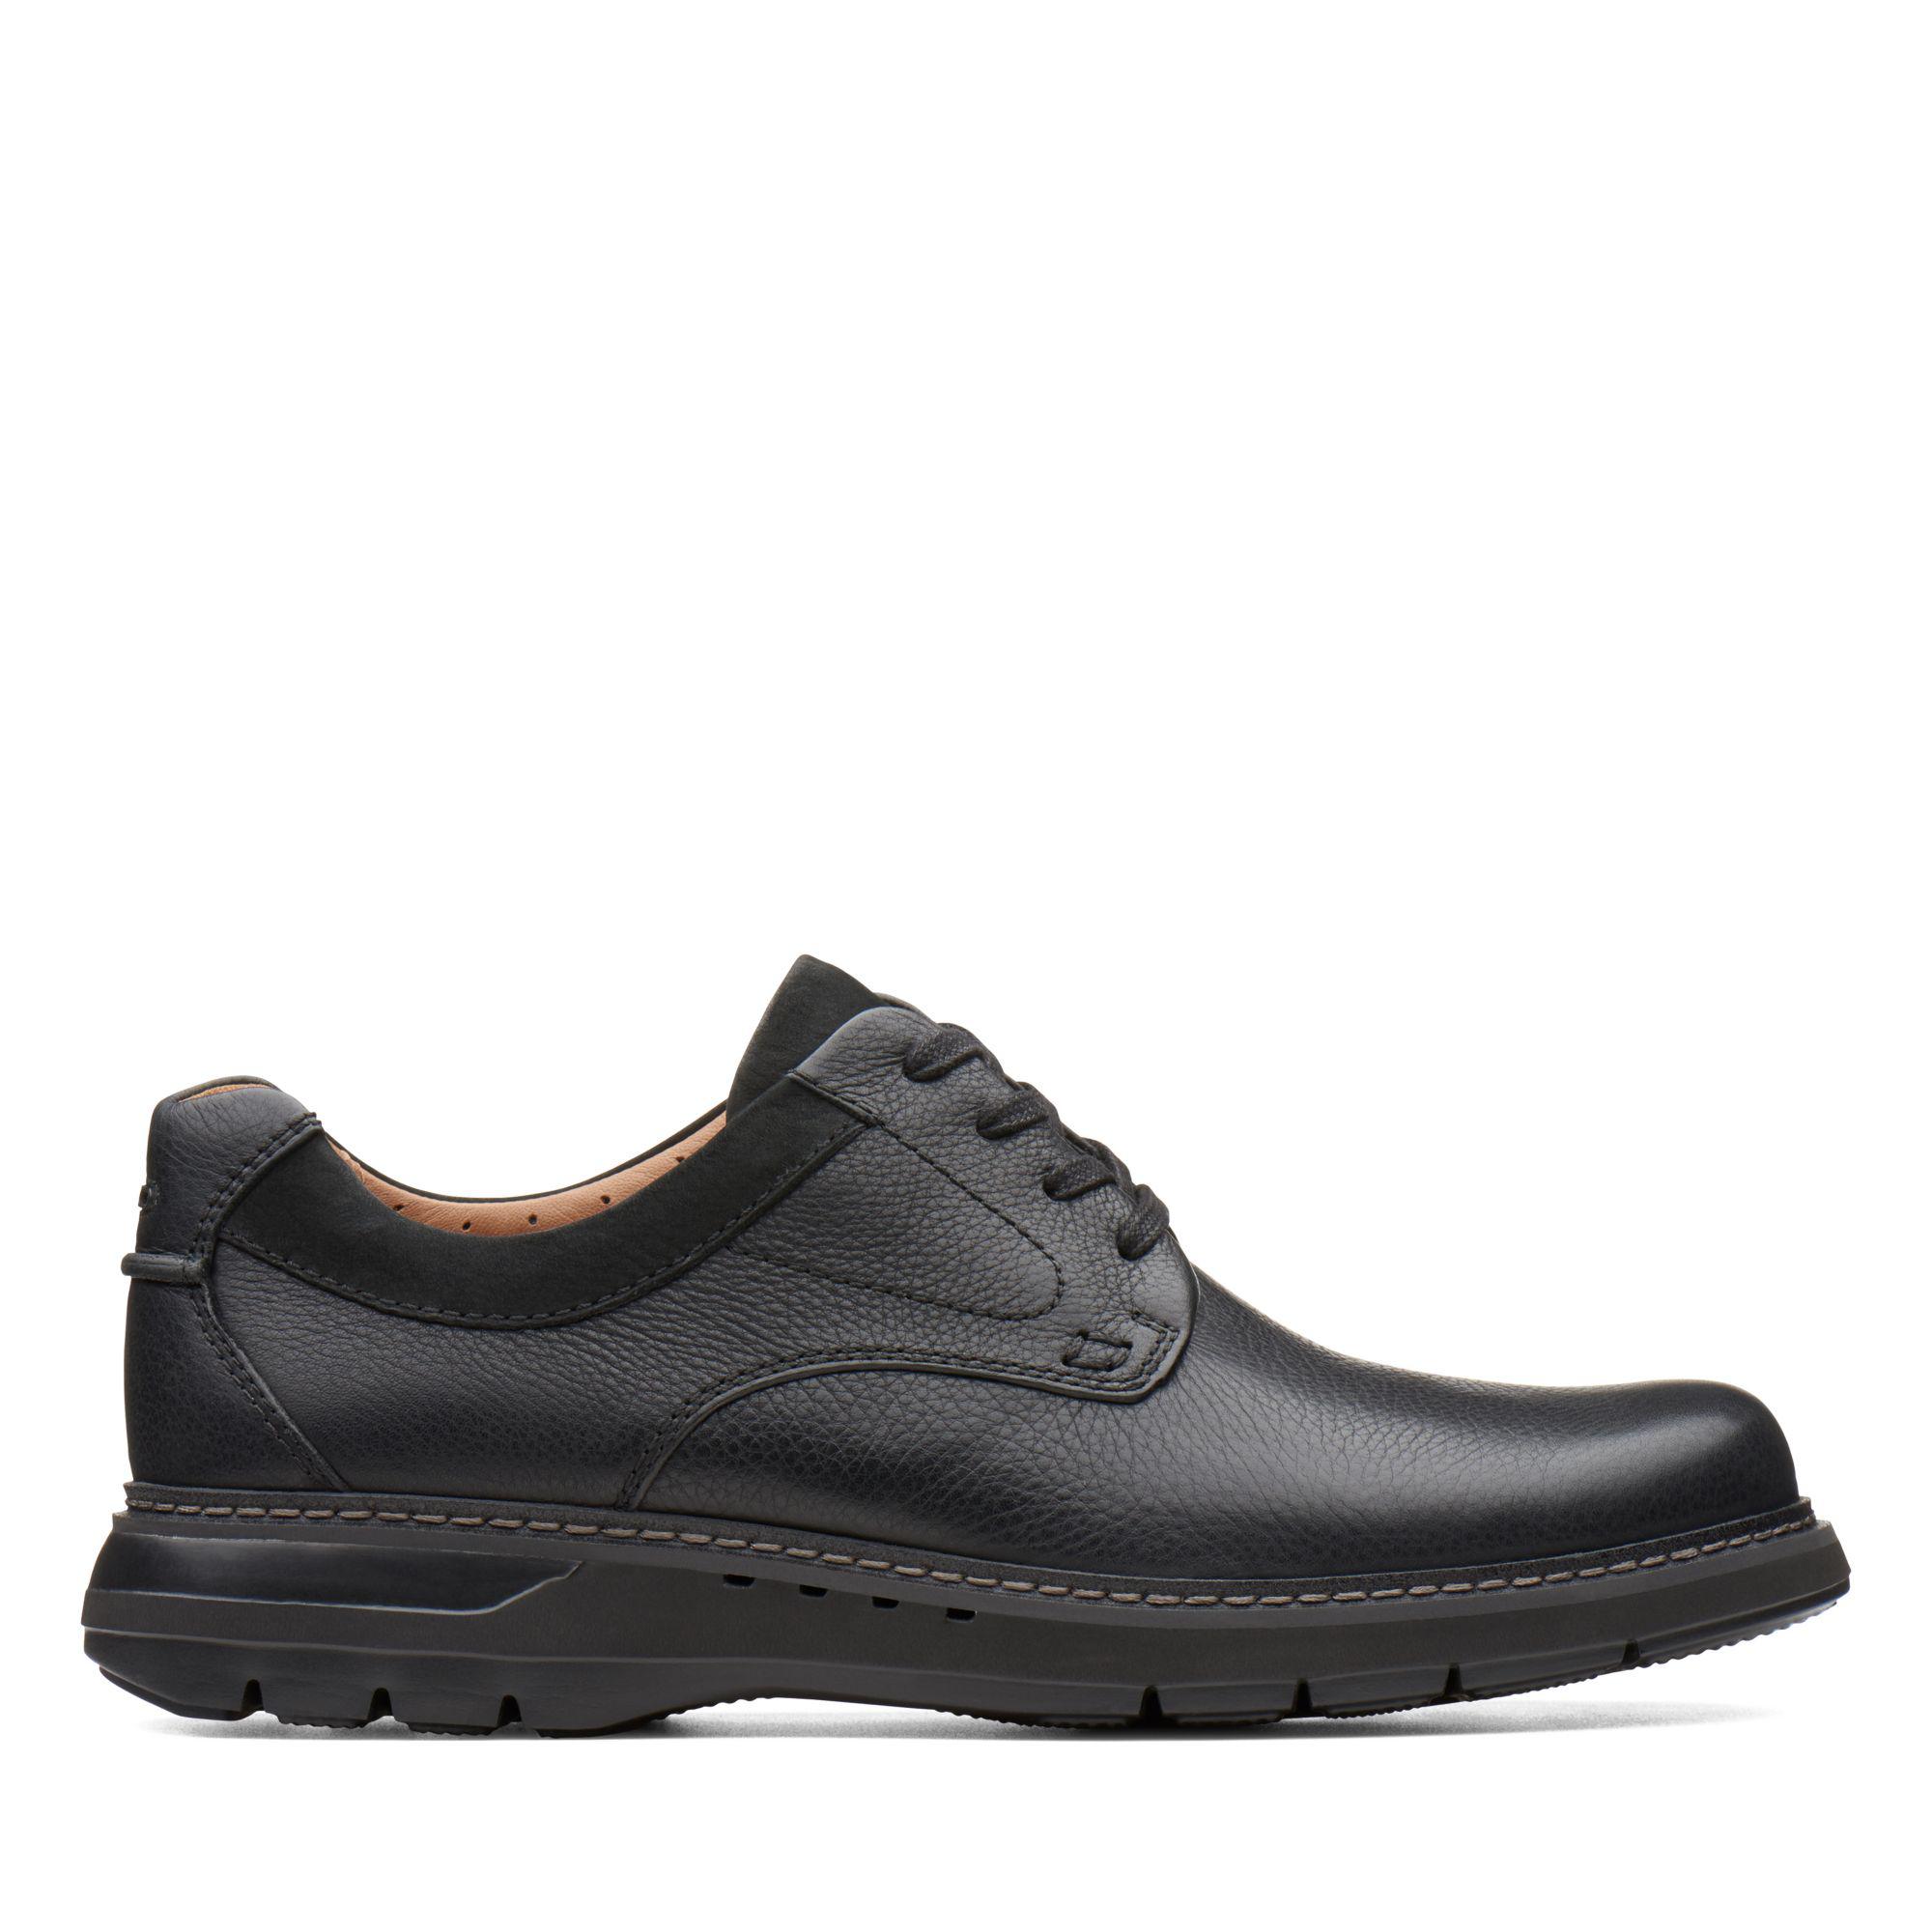 Clarks Leather Un Ramble Lo in Black Leather (Black) for Men - Lyst